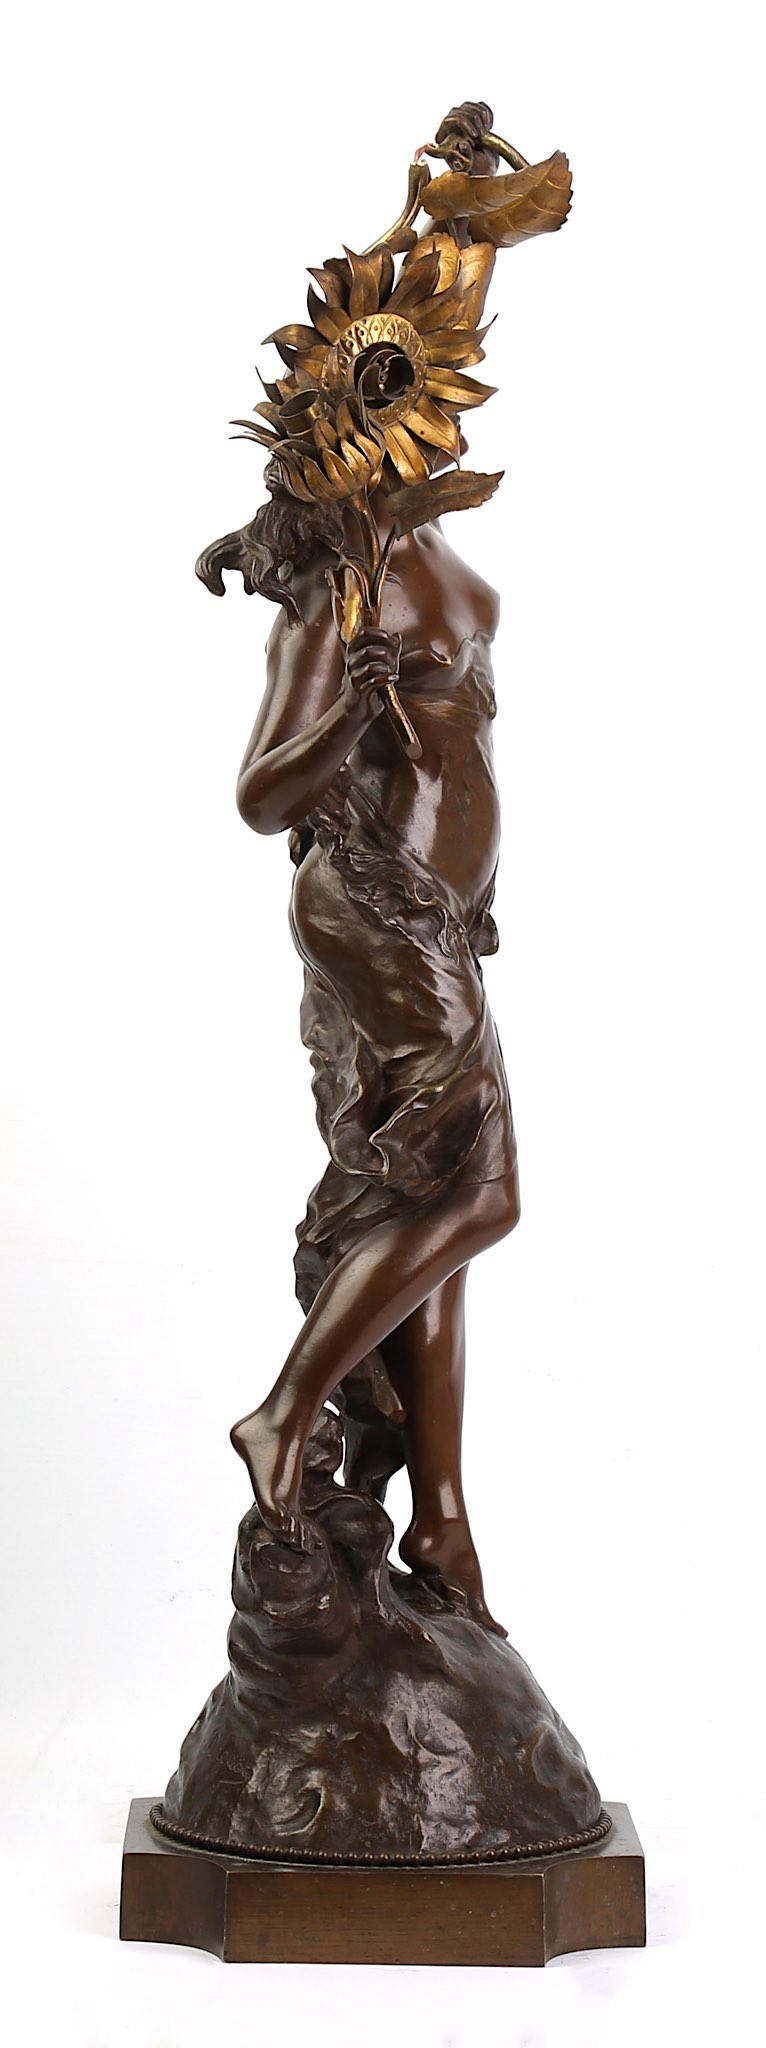 EDOUARD DROUOT (FRENCH, 1859-1945): A BRONZE FIGURE OF A SEMI-CLAD MAIDEN FITTED AS A LAMP BASE - Image 4 of 11